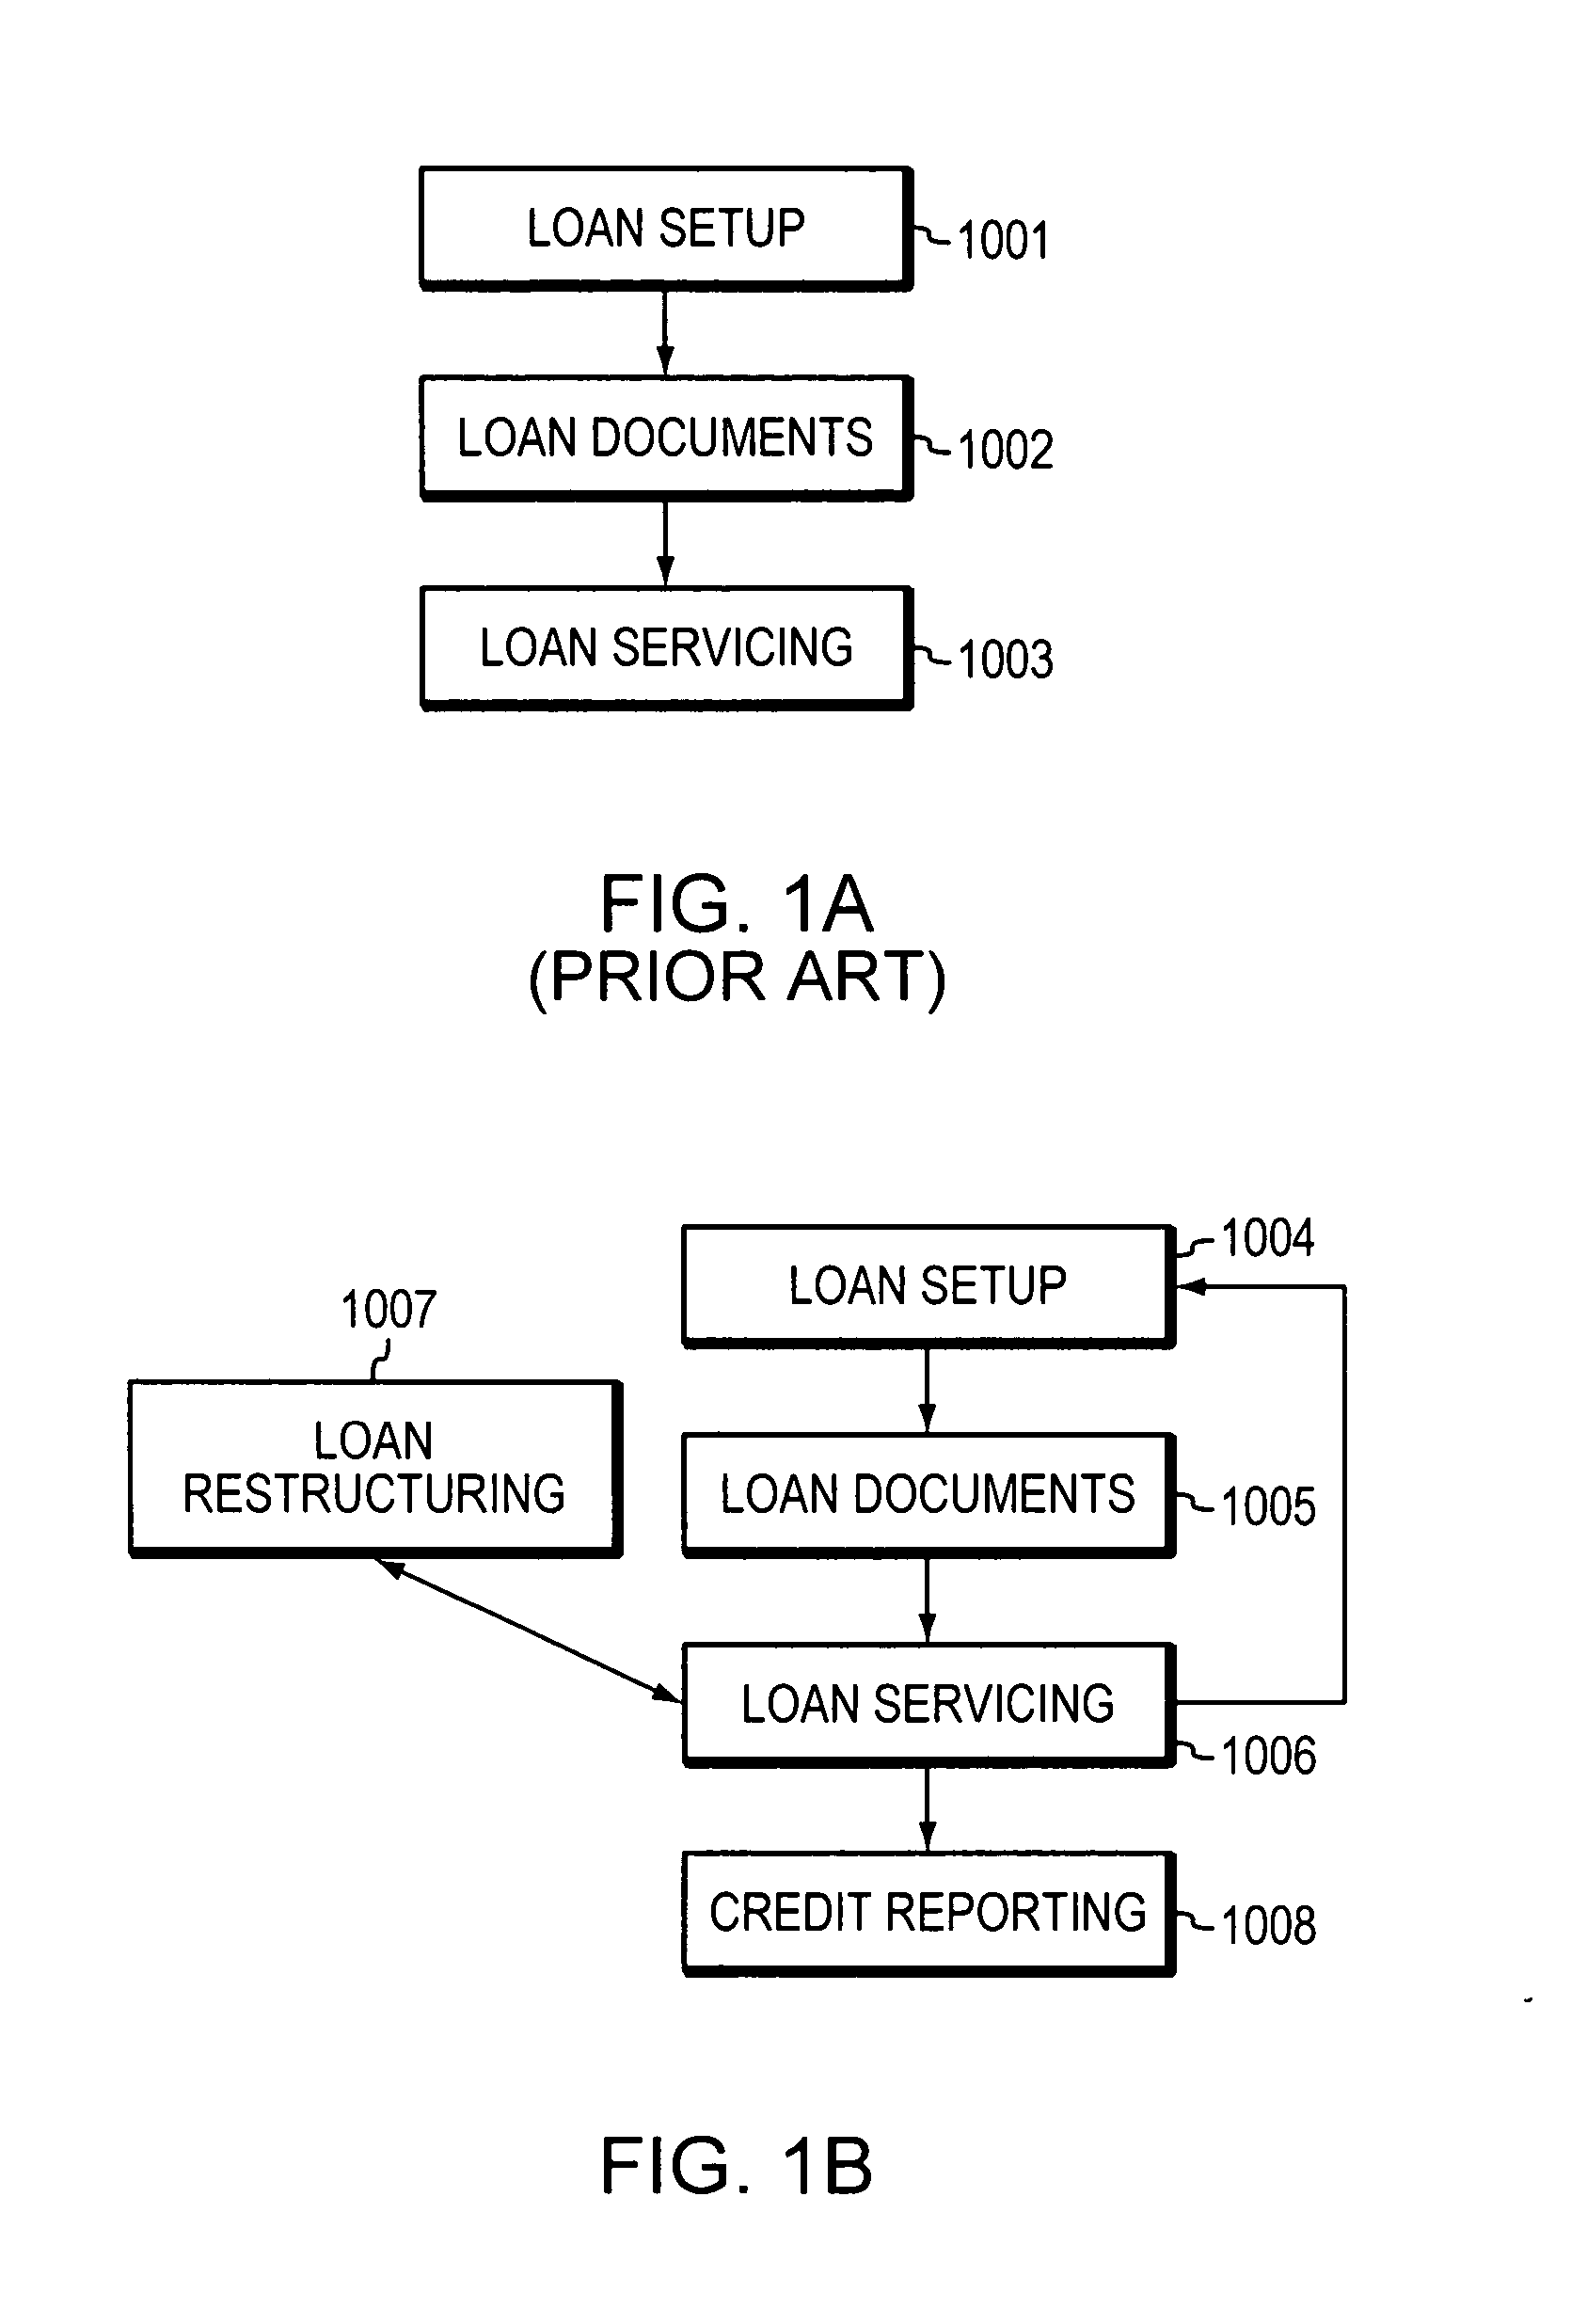 System and method for automated flexible person-to-person lending